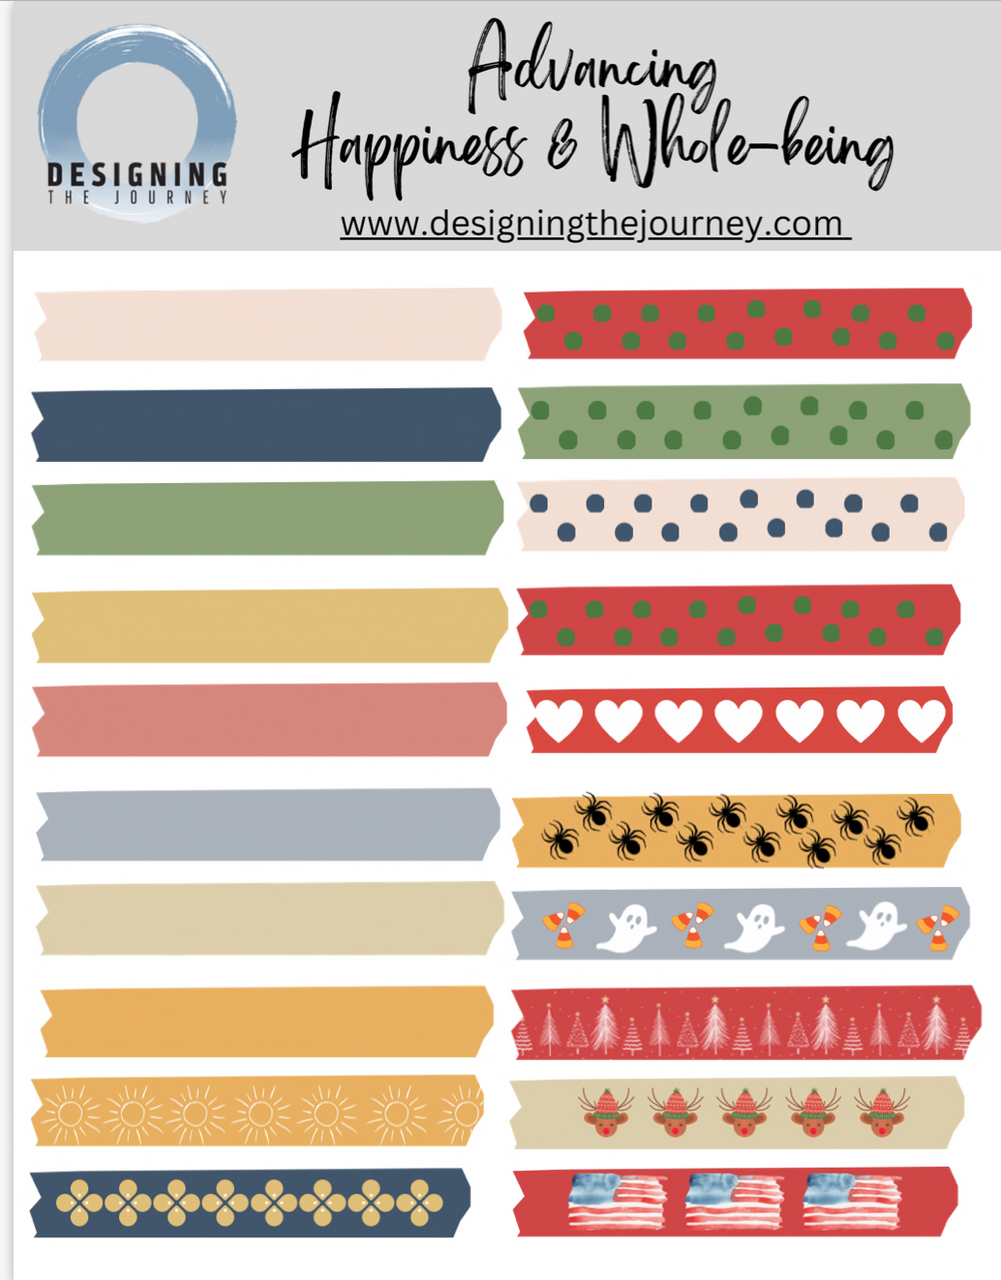 Digital Washi Tape Stickers for GoodNotes (Downloadable